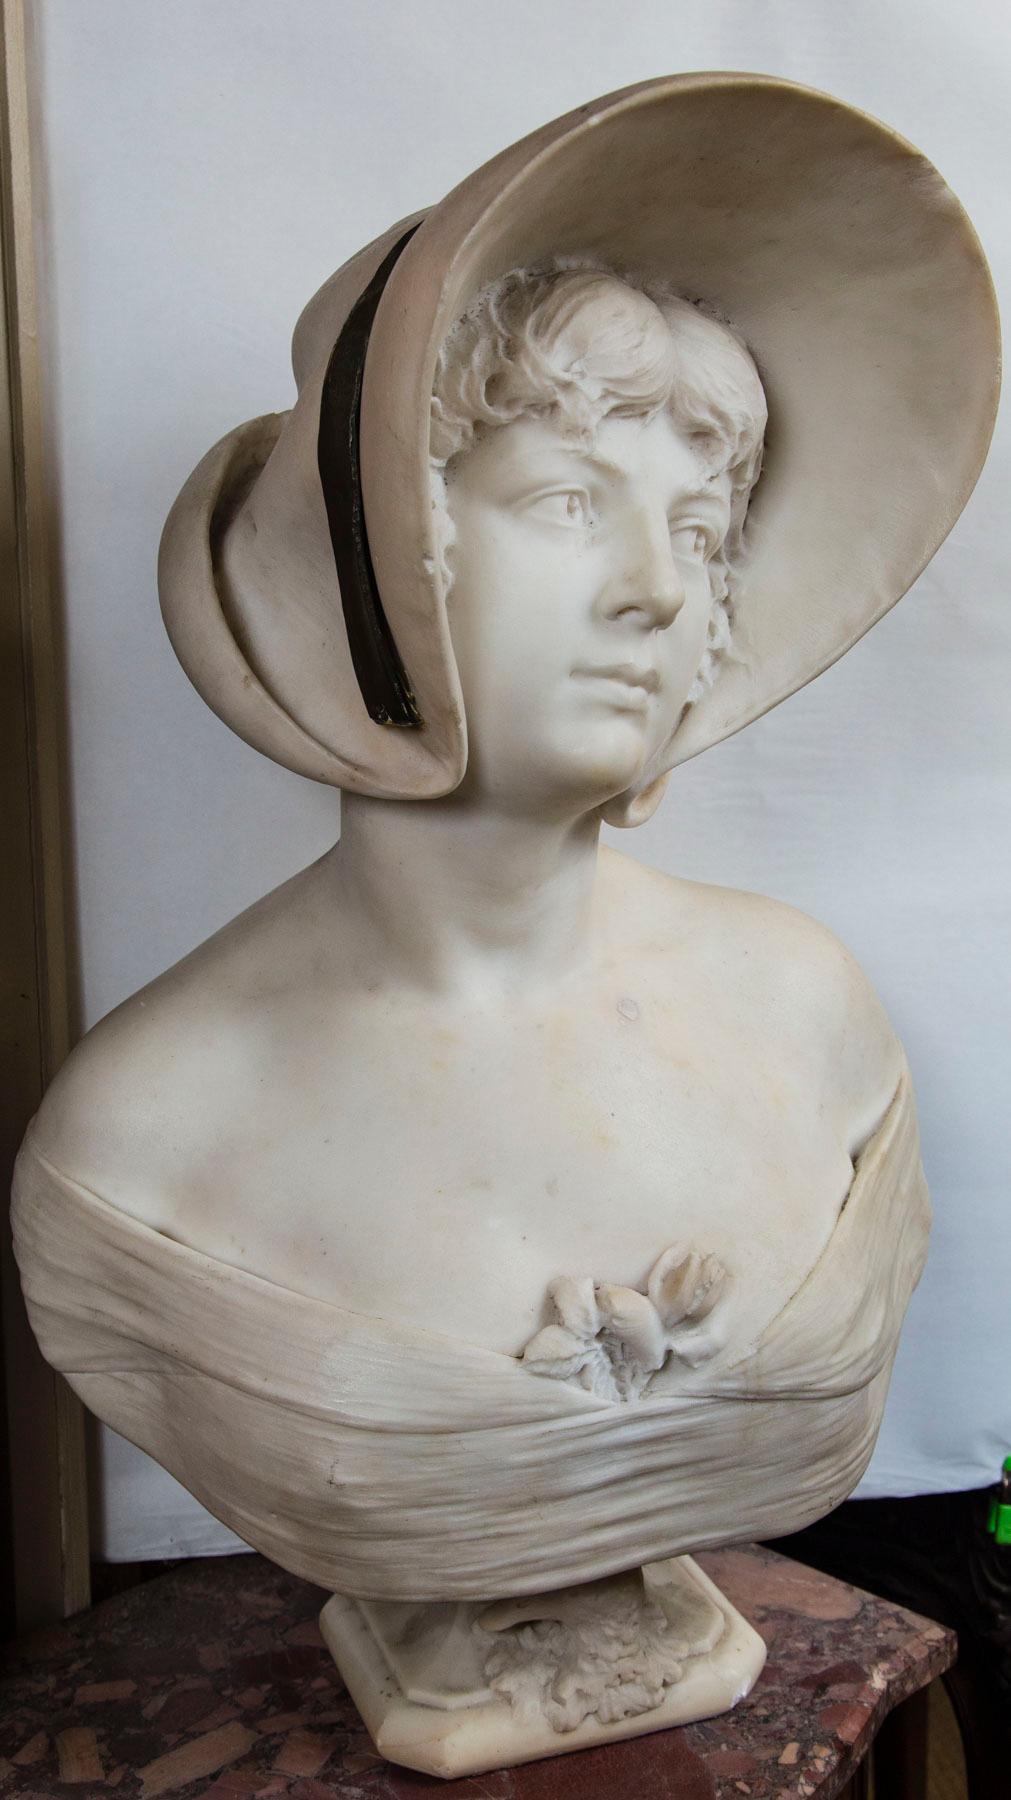 The hat has a bronze band affixed to it. Her shoulders are bare and there is a small bouquet of flowers tucked into the bodice. Her hair cascades from below the back of the hat, which has an upturned brim at the back. Below the bust, on the pedestal